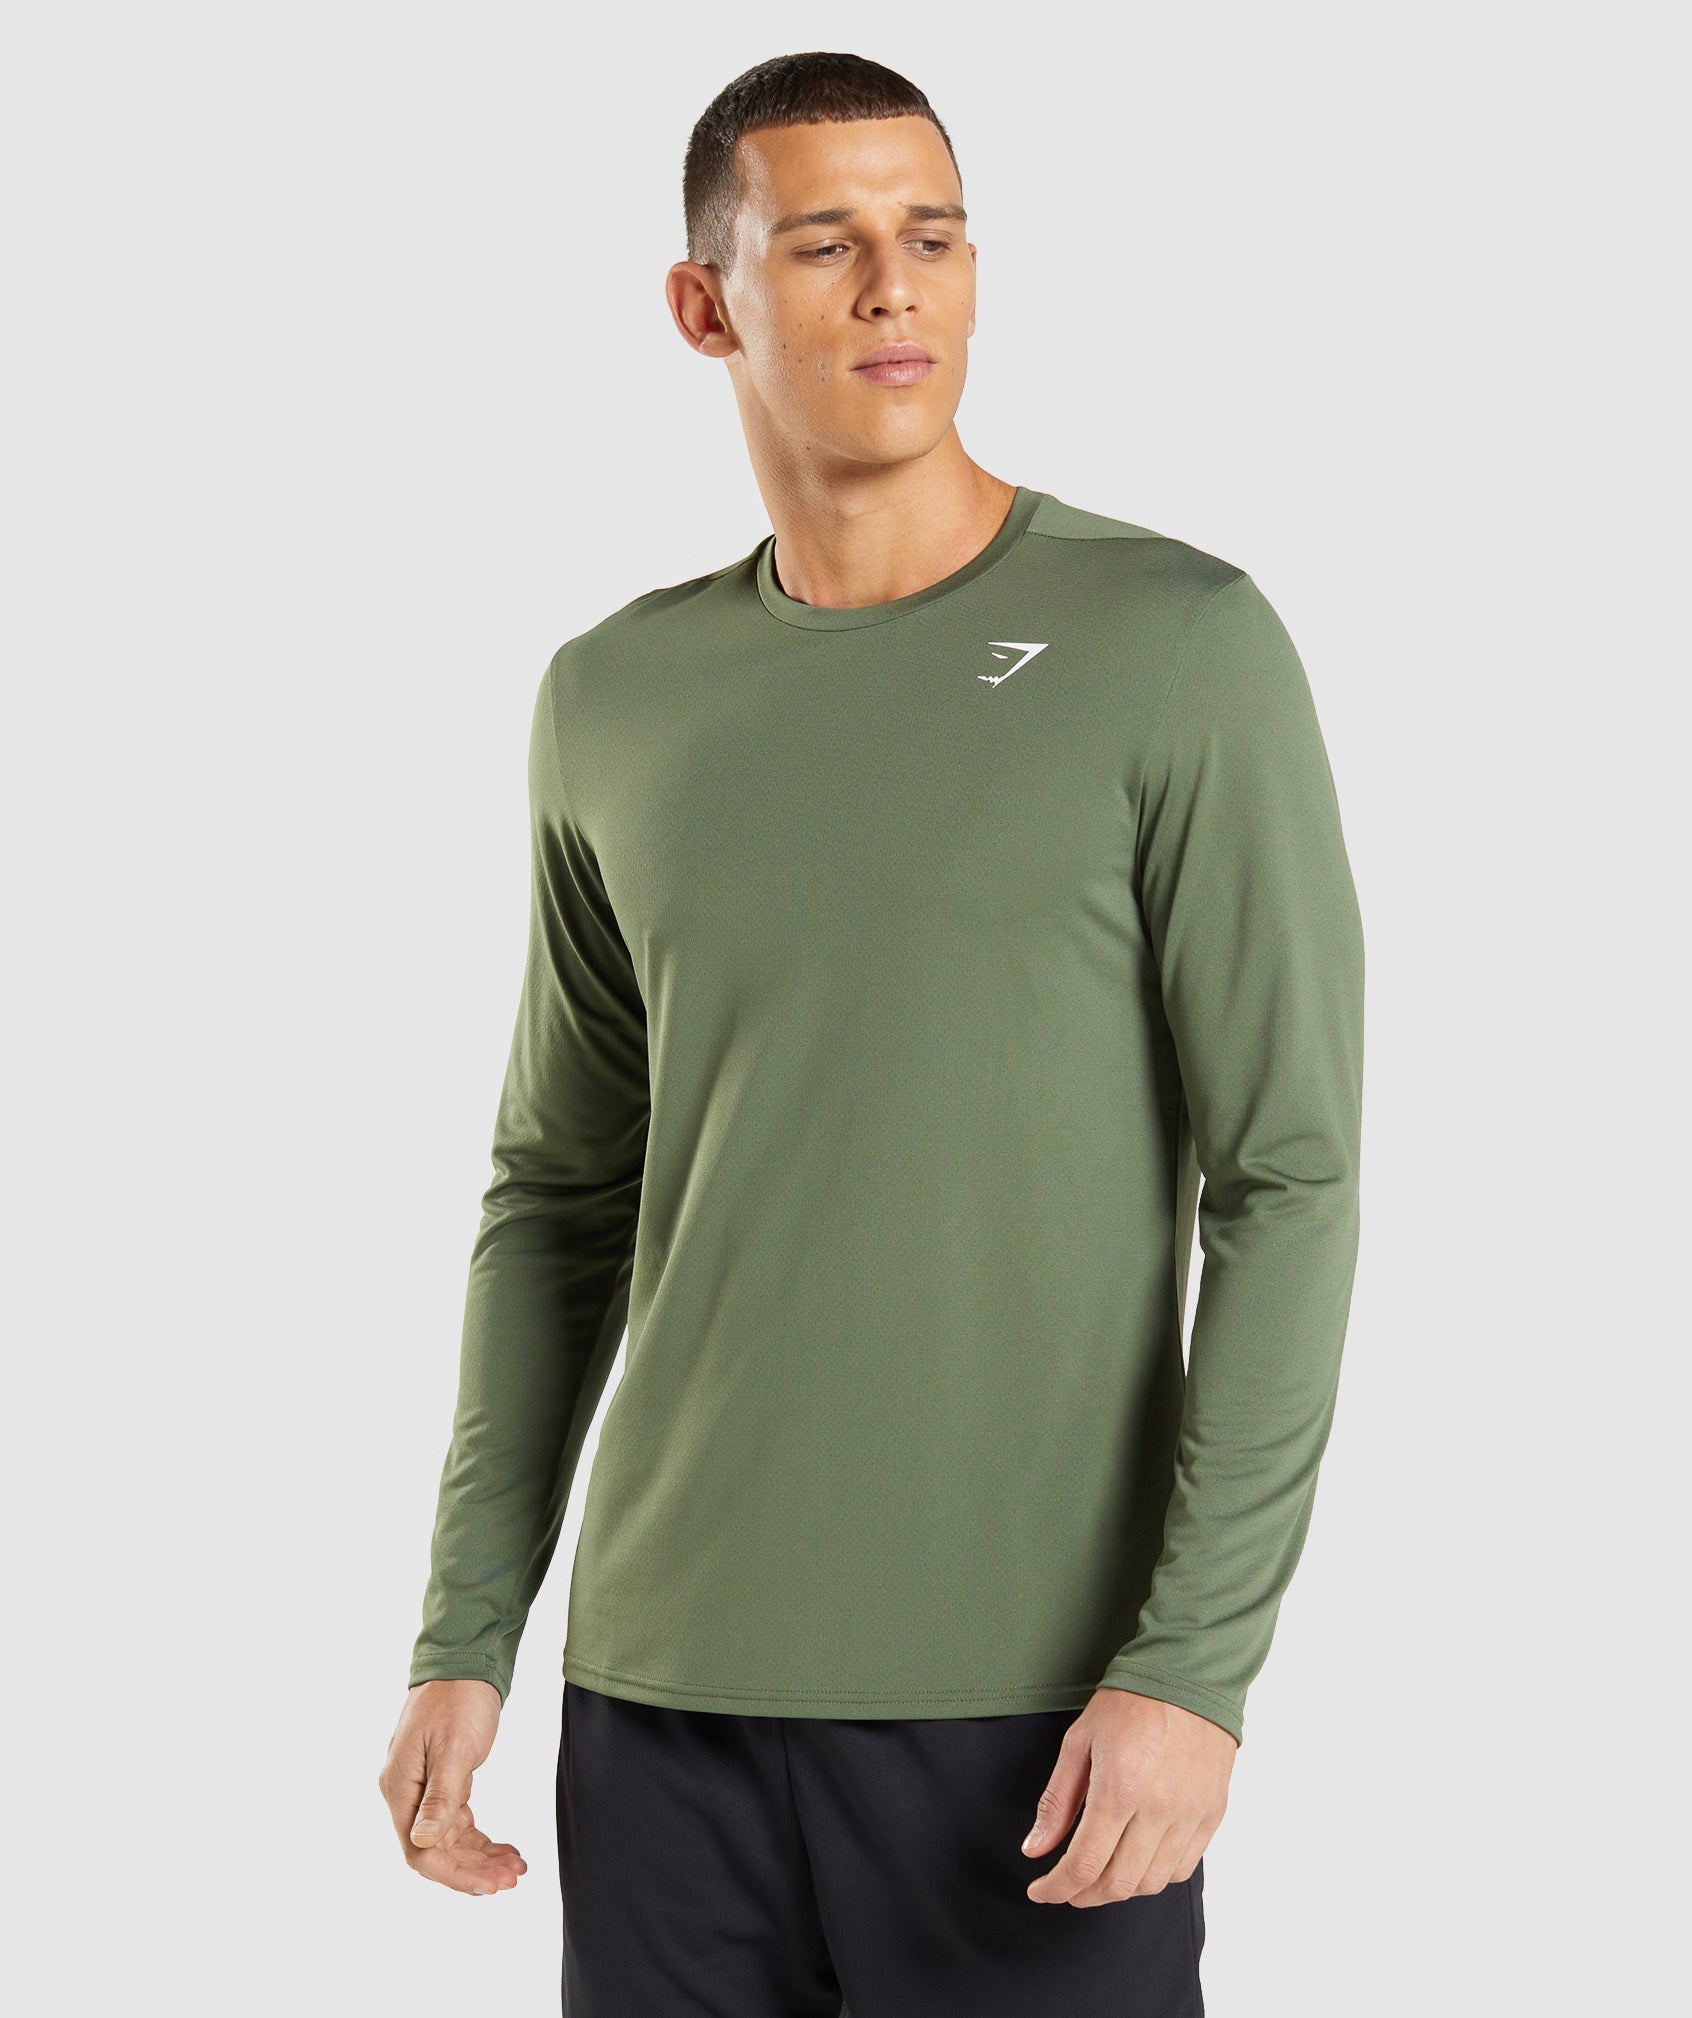 Arrival Long Sleeve T-Shirt in Core Olive - view 1